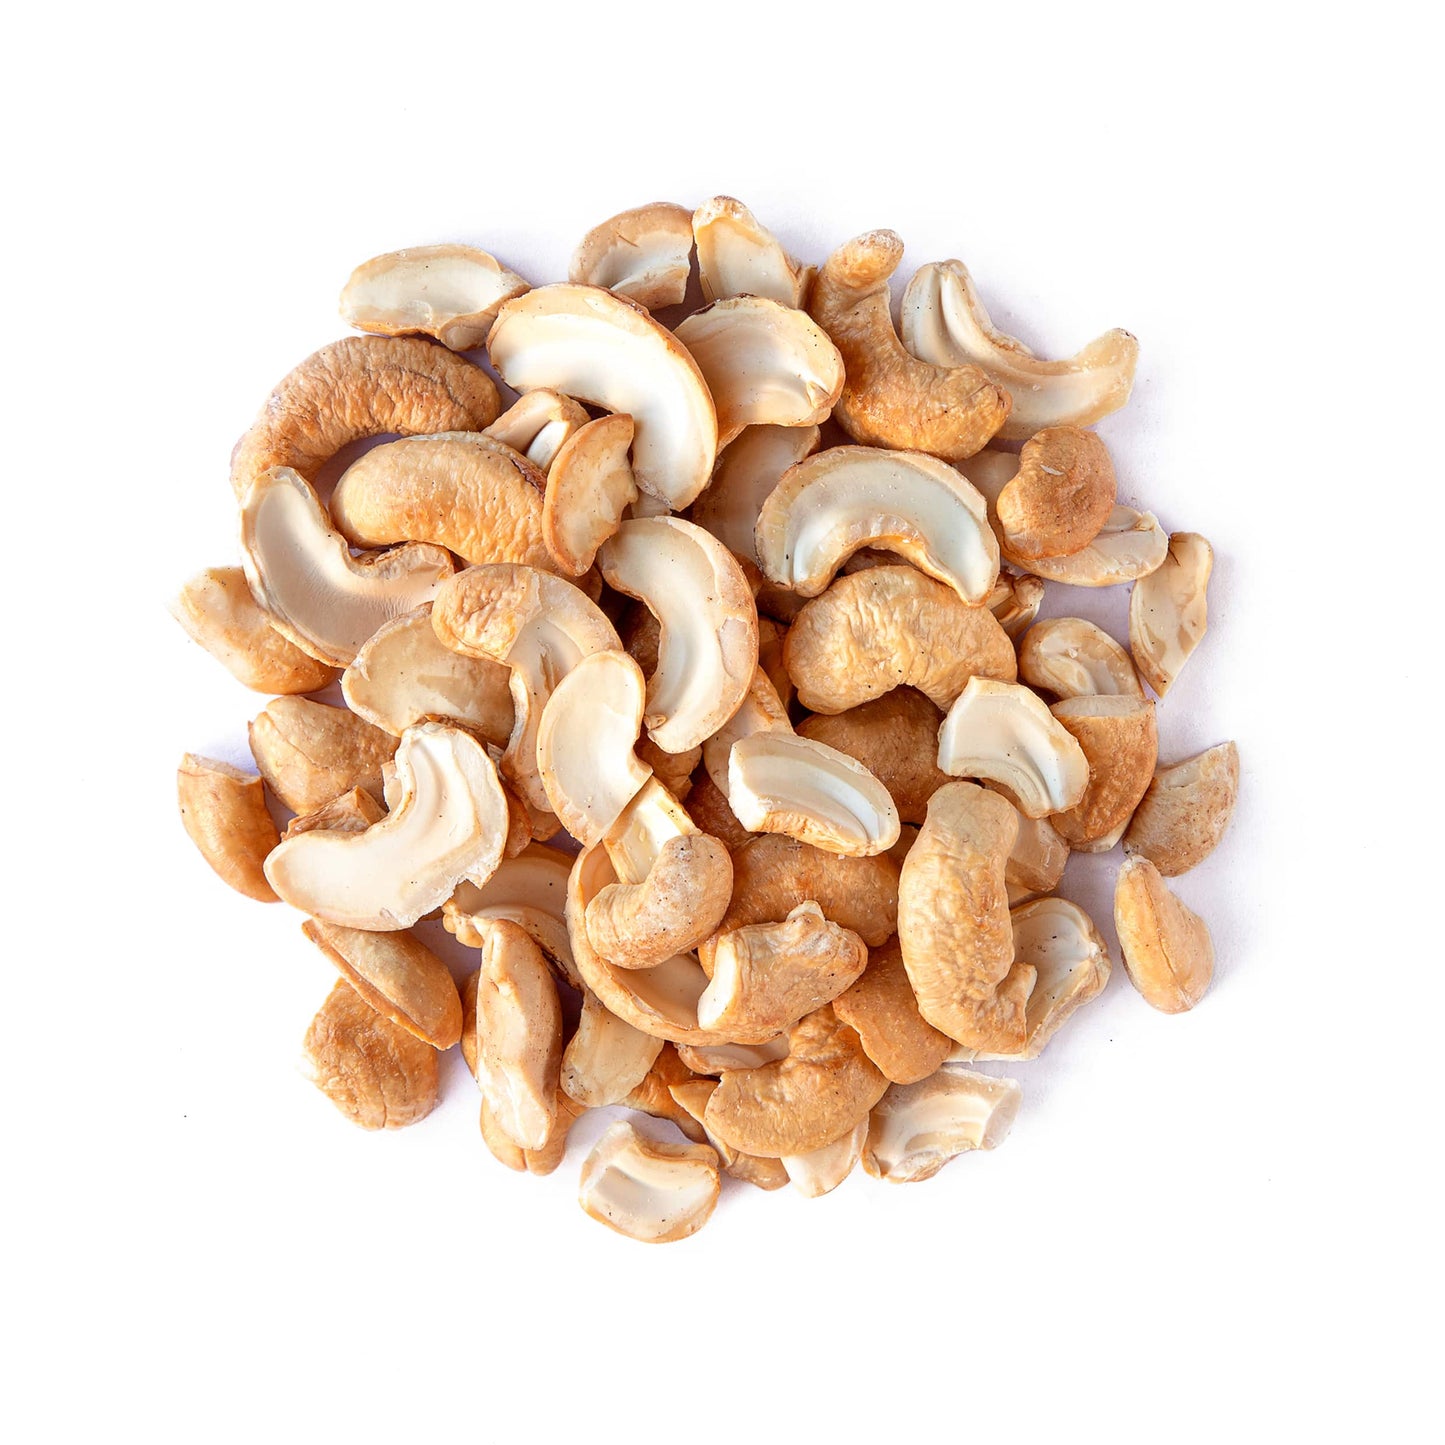 Dry Roasted Cashew Halves and Pieces with Himalayan Salt – Oven Roasted Nuts, Lightly Salted, No Oil Added, Vegan Snack, Keto, Kosher, Bulk. High in Protein, Healthy Fats. Great for Baking